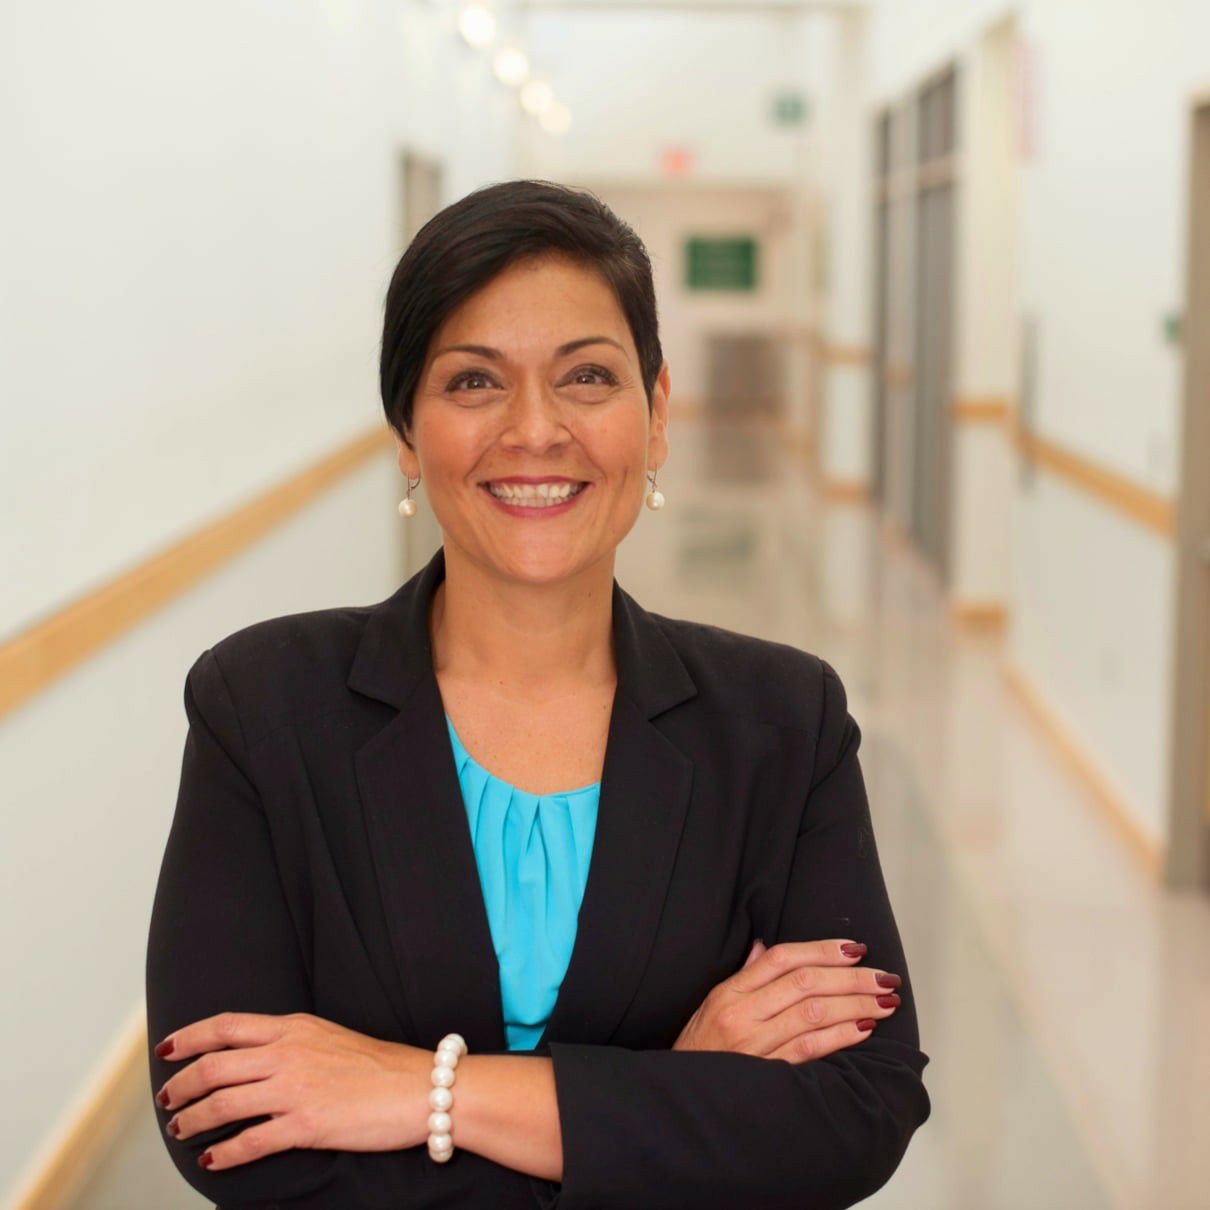 Hala Ayala Releases Plan to Protect Black Mothers, End Racial Disparities in Healthcare Outcomes